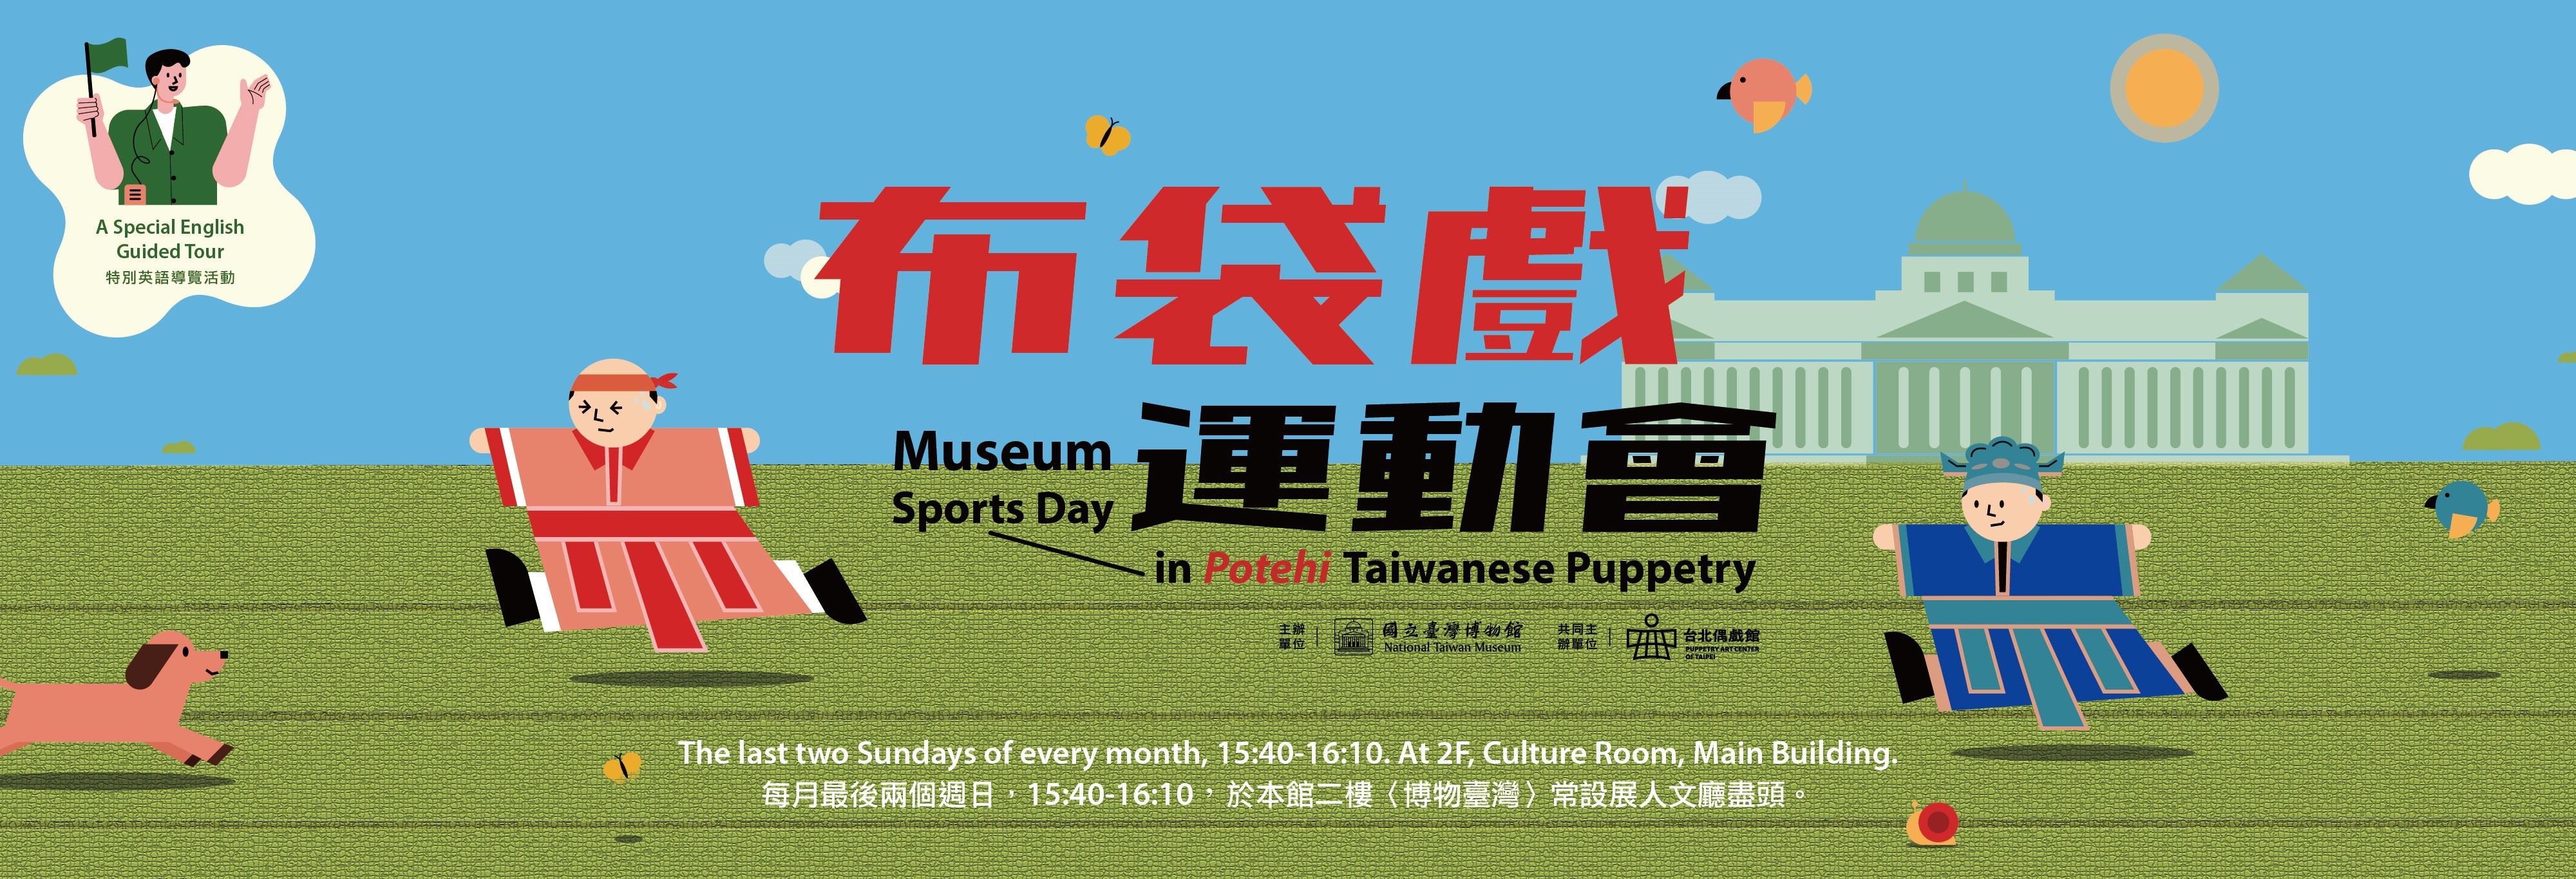 A Special English Guided Tour: Museum Sports Day in 